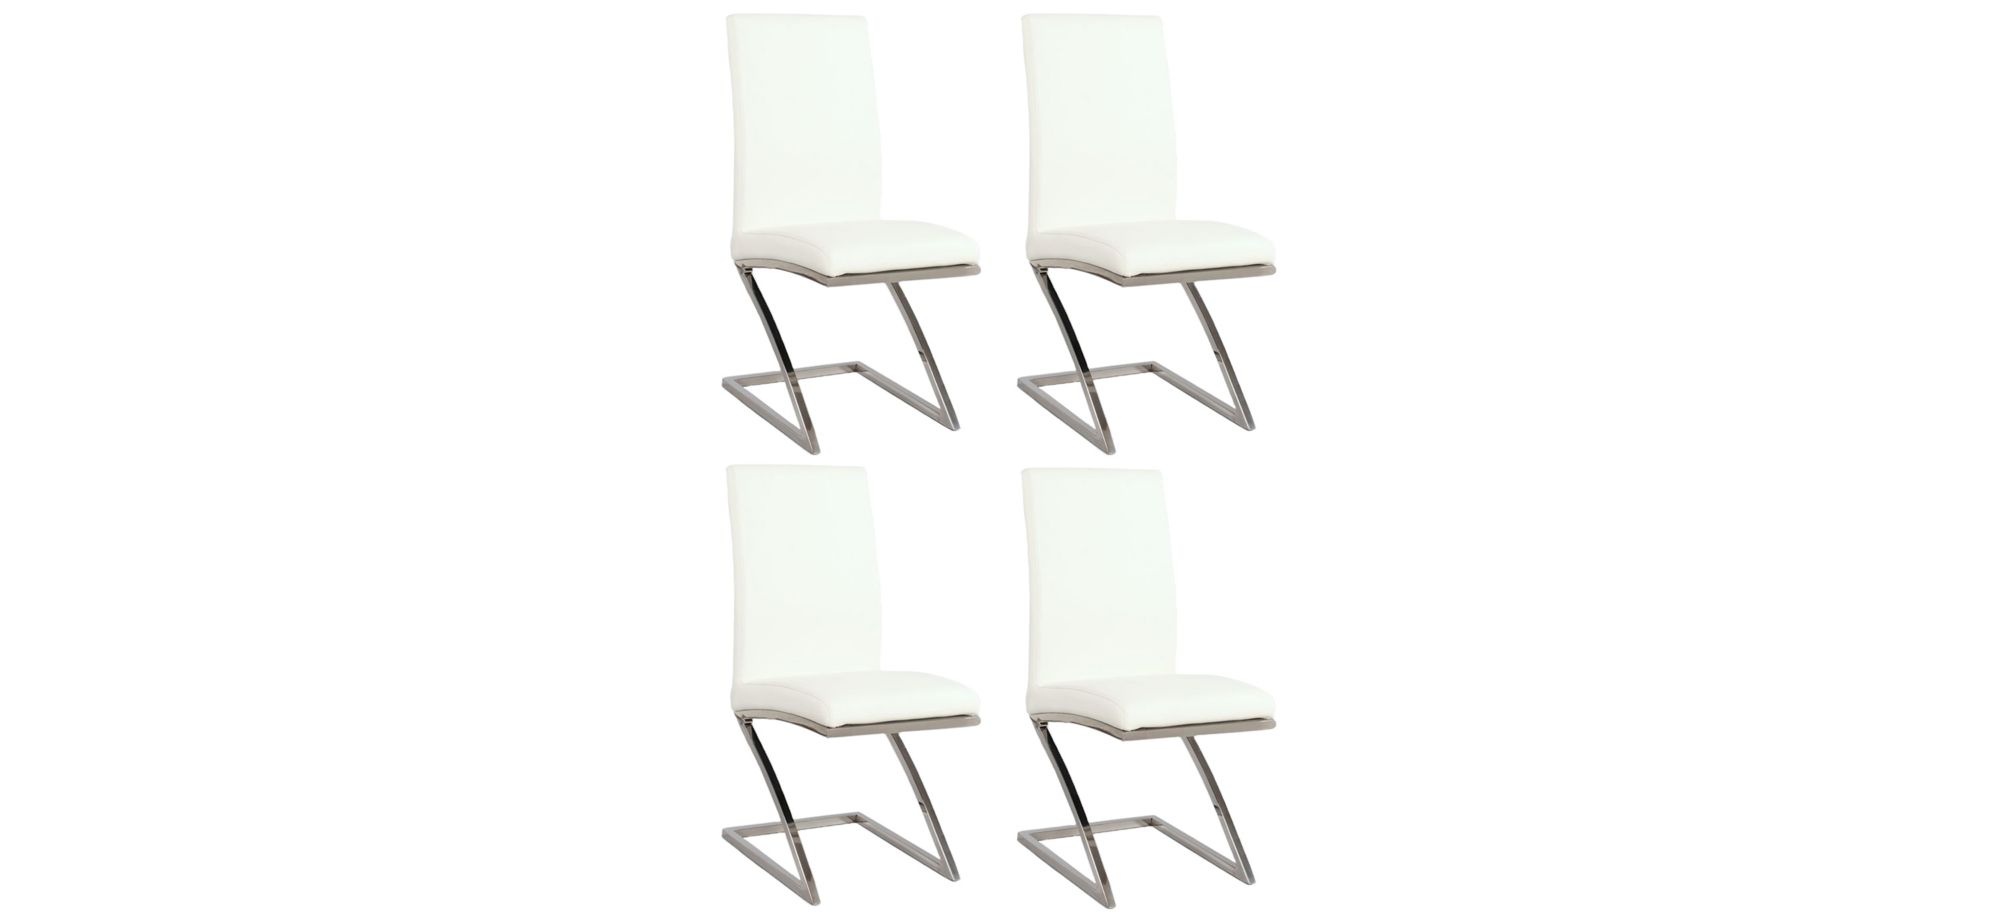 Jade Dining Chairs - Set of 4 in Stainless Steel by Chintaly Imports